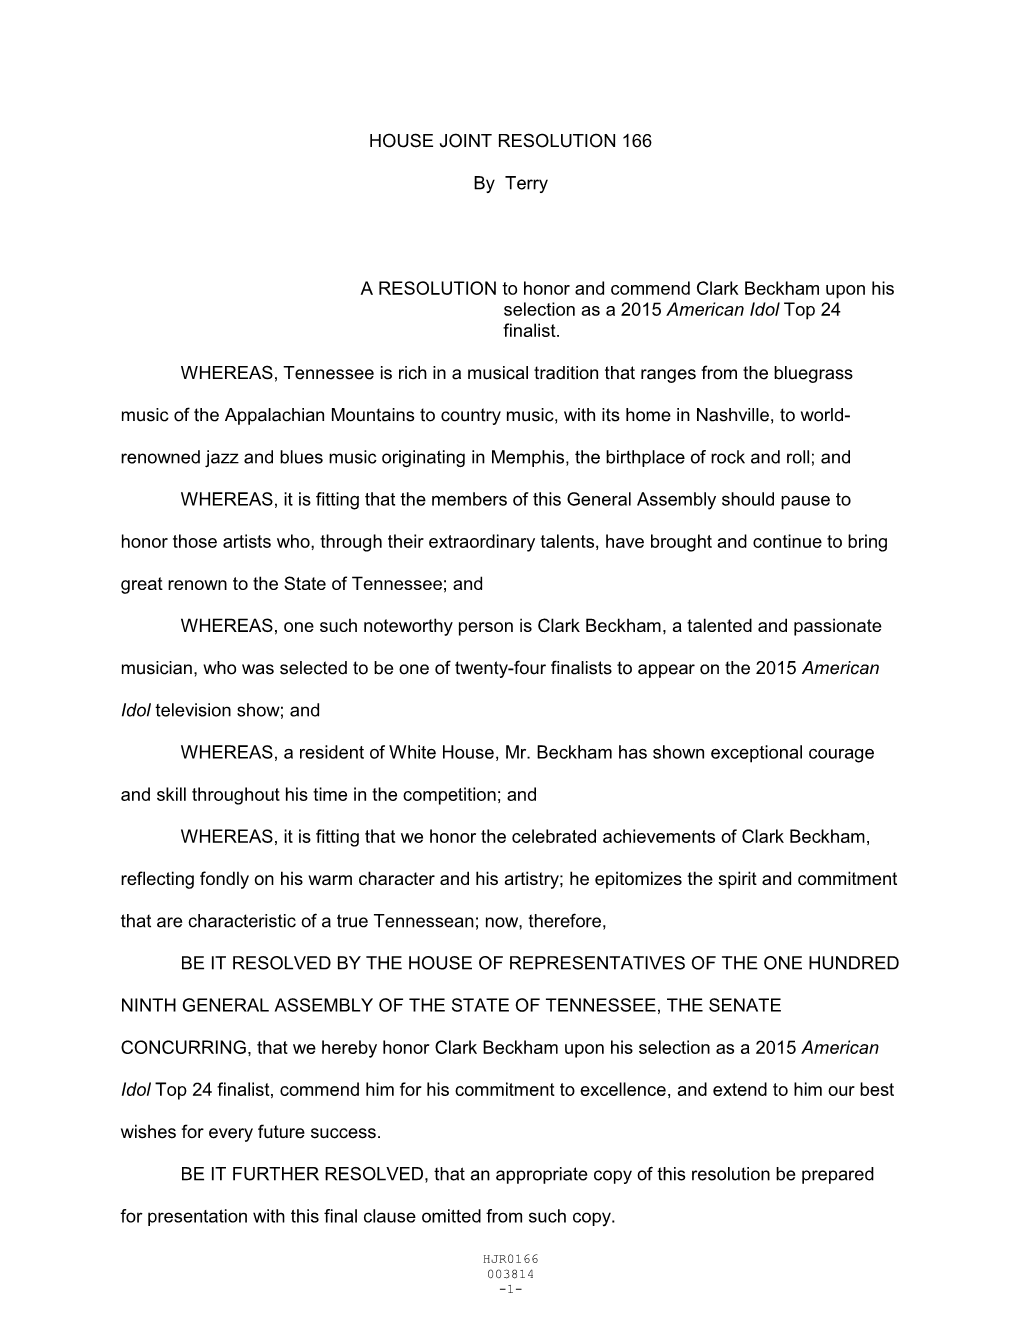 HOUSE JOINT RESOLUTION 166 by Terry a RESOLUTION To